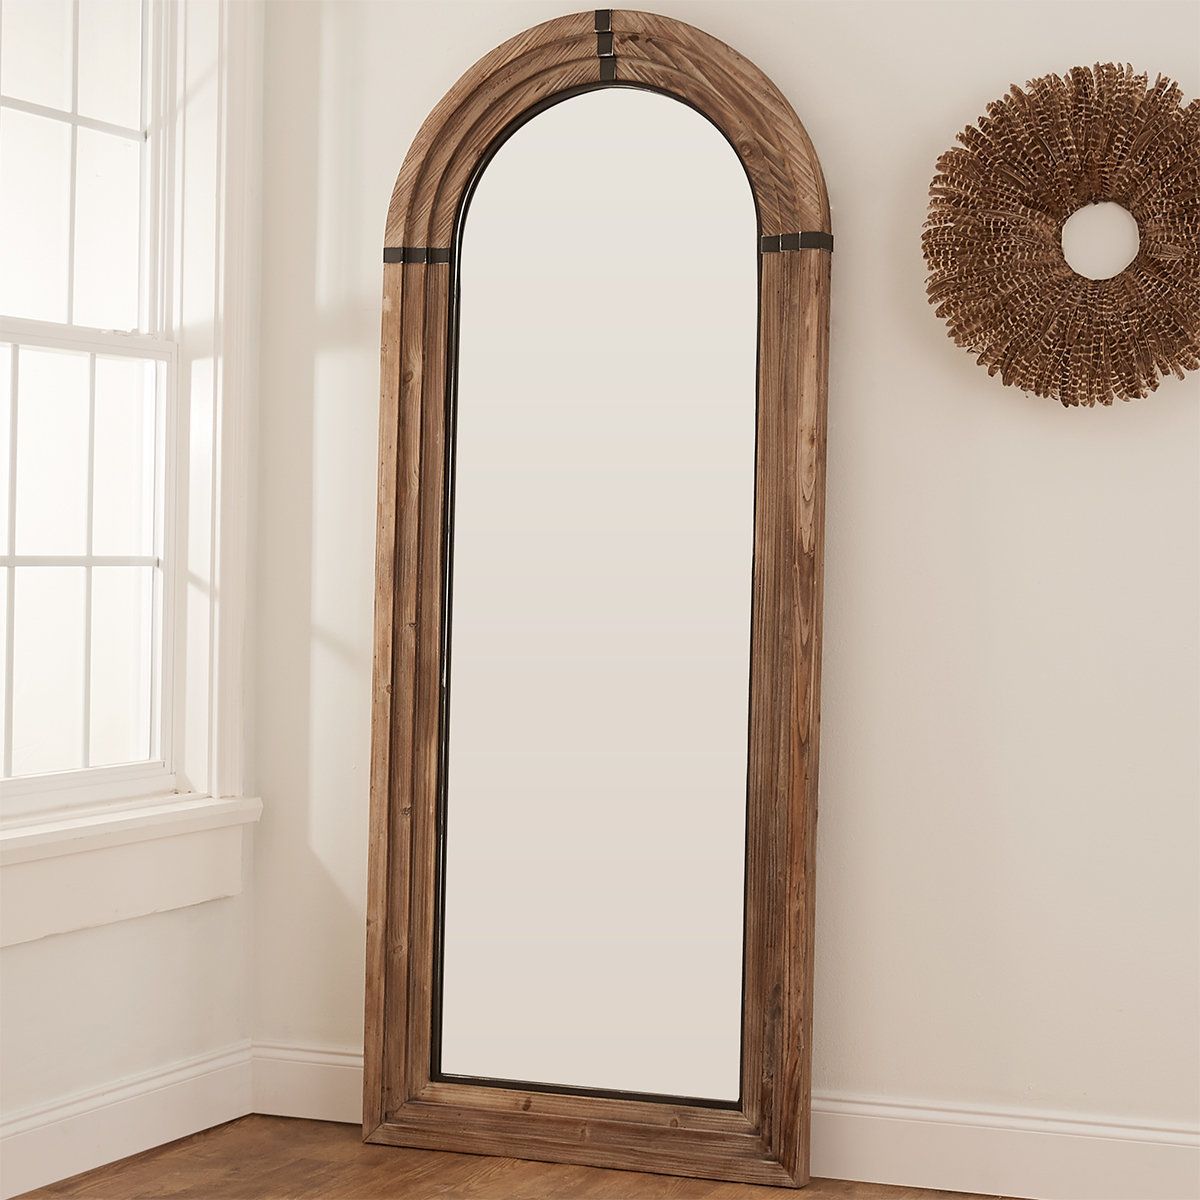 Echo Arch Lean Mirror In 2021 | Oval Wall Mirror, Mirror, Tall Mirror Decor Intended For Waved Arch Tall Traditional Wall Mirrors (View 2 of 15)